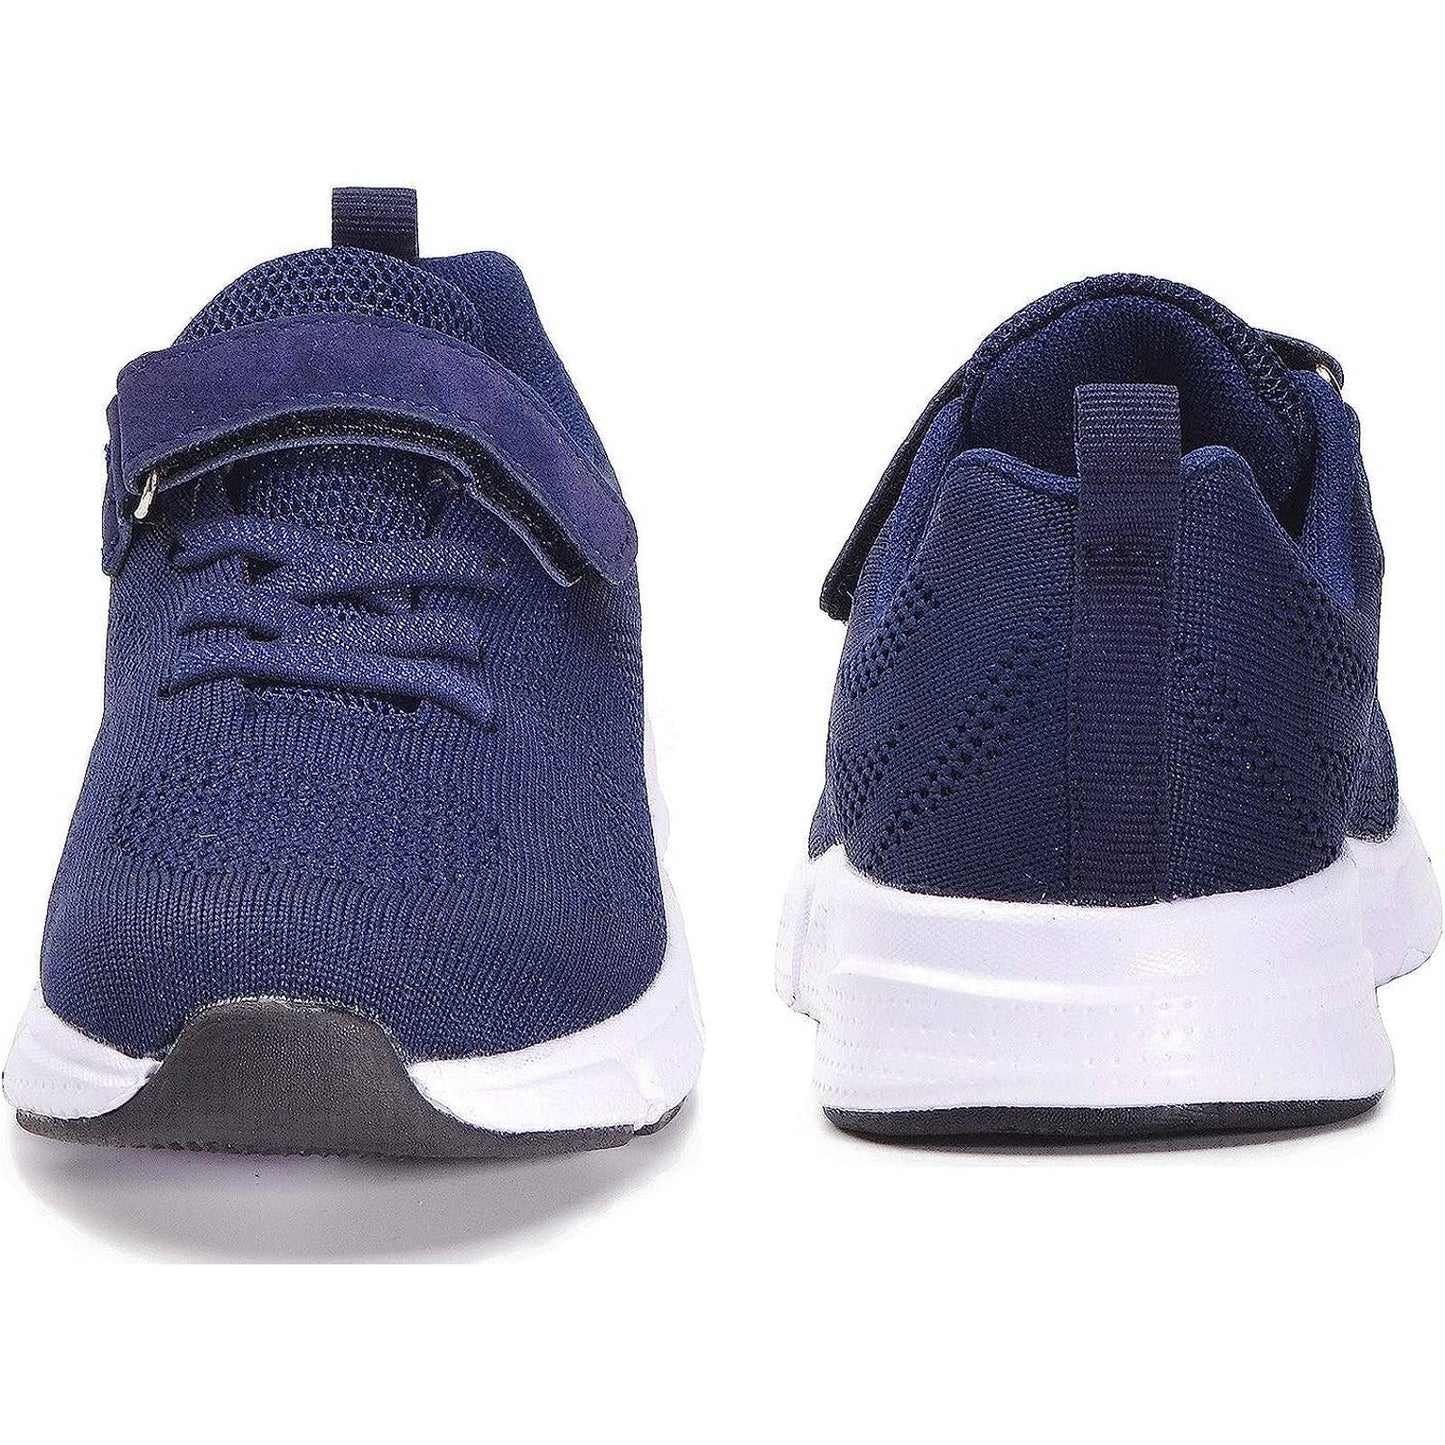 Copied - KVbabby Trainers children's sports shoes NEW and BLUE size 28 EU/ 2US